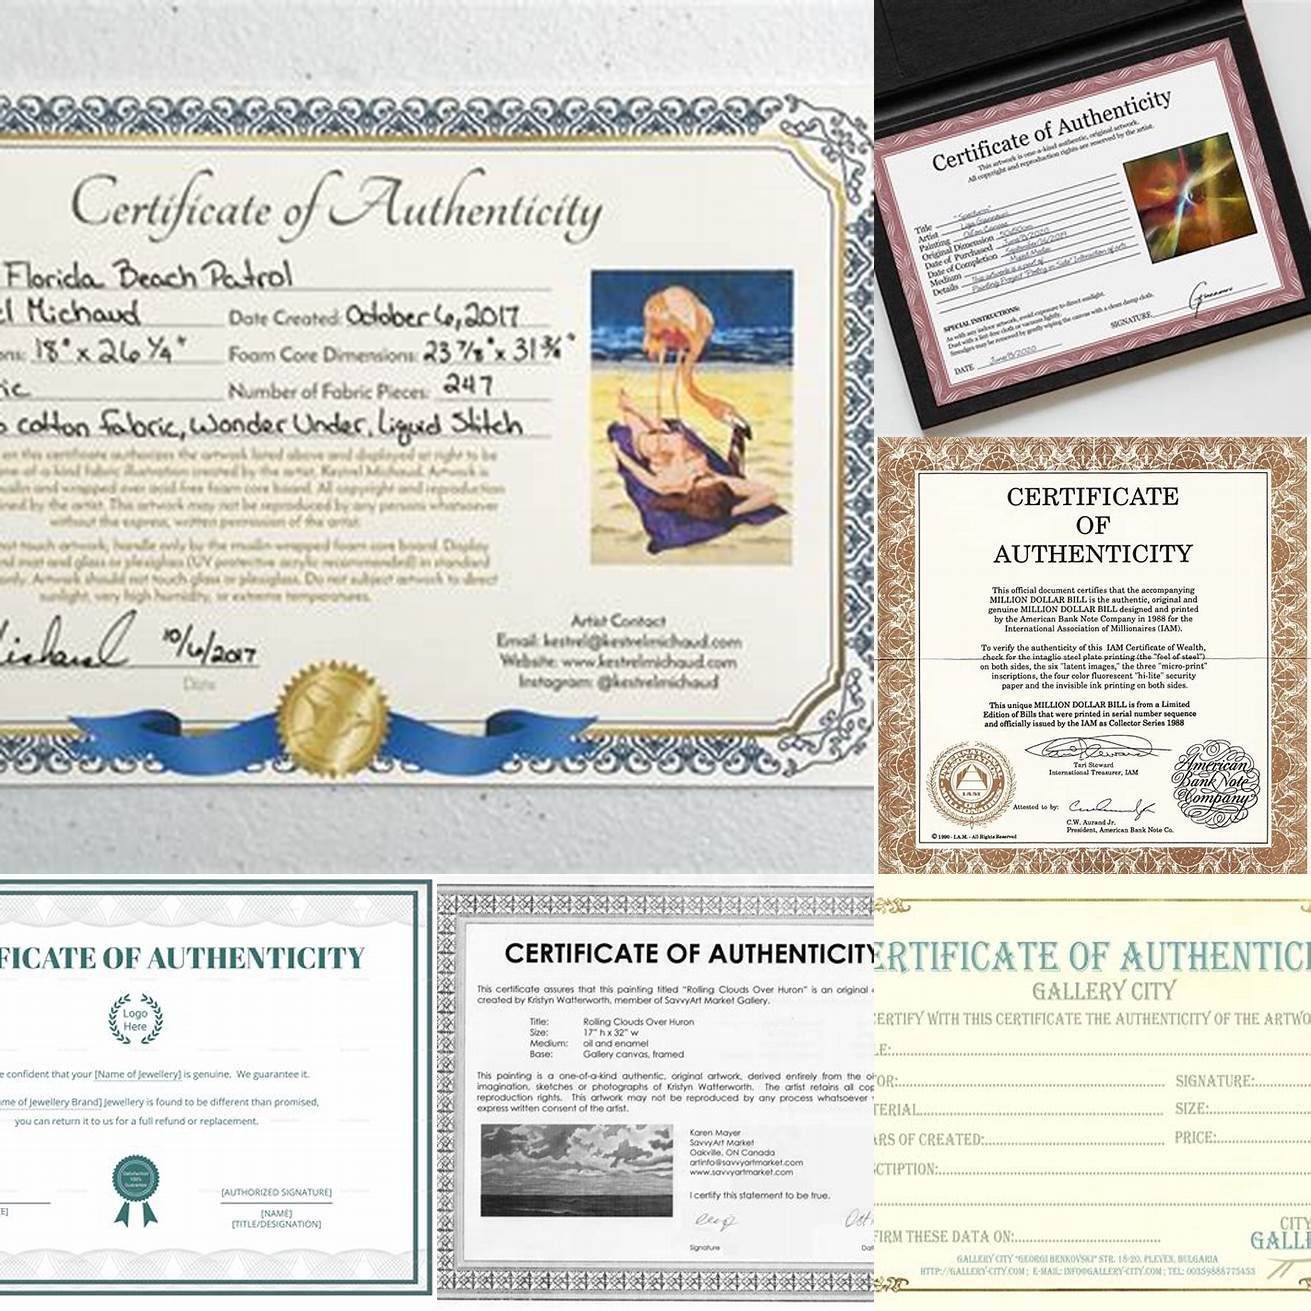 Ask for a Certificate of Authenticity